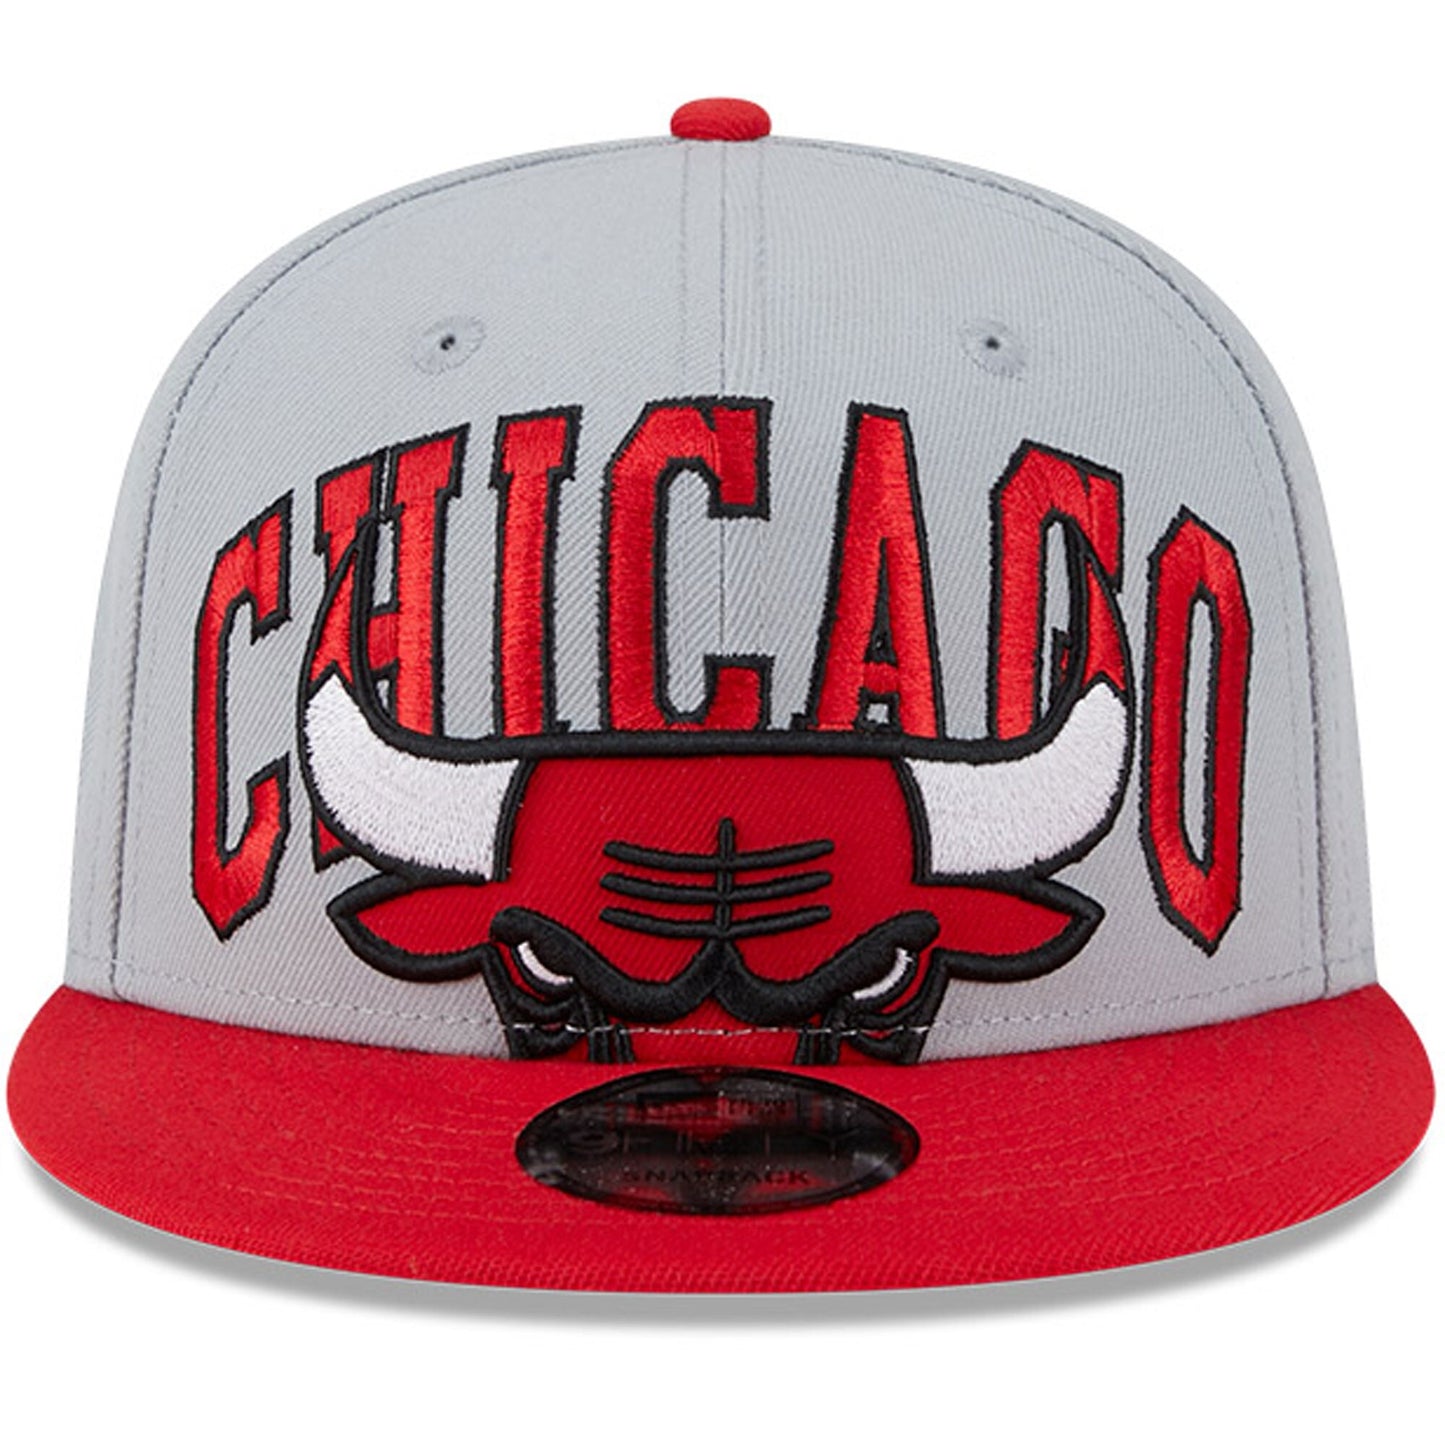 Men's Chicago Bulls New Era Gray/Red Tip-Off Two-Tone 9FIFTY Snapback Hat